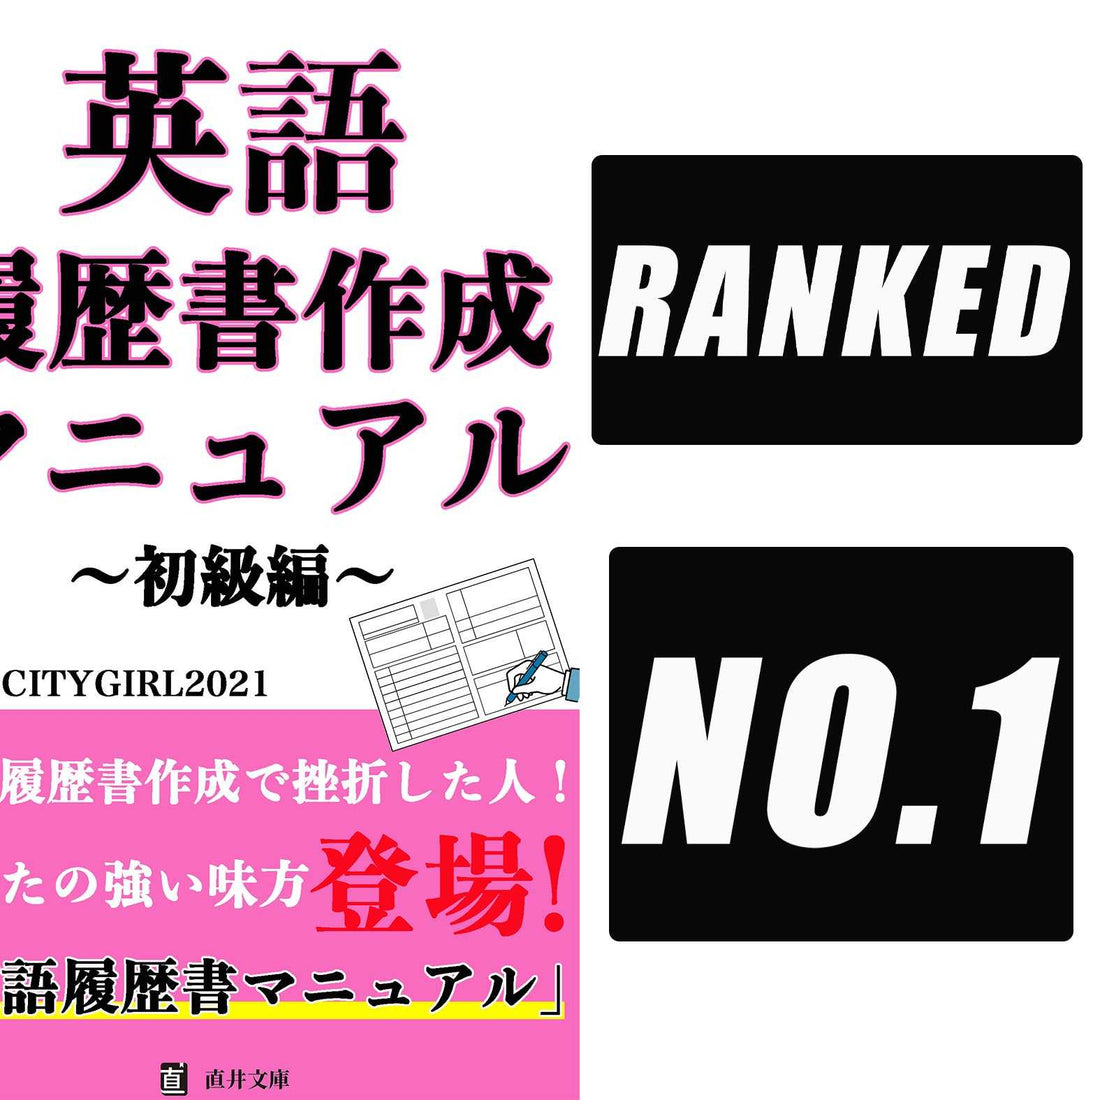 Report: Ranked No. 1 on the Kindle store! | Trendy Japan